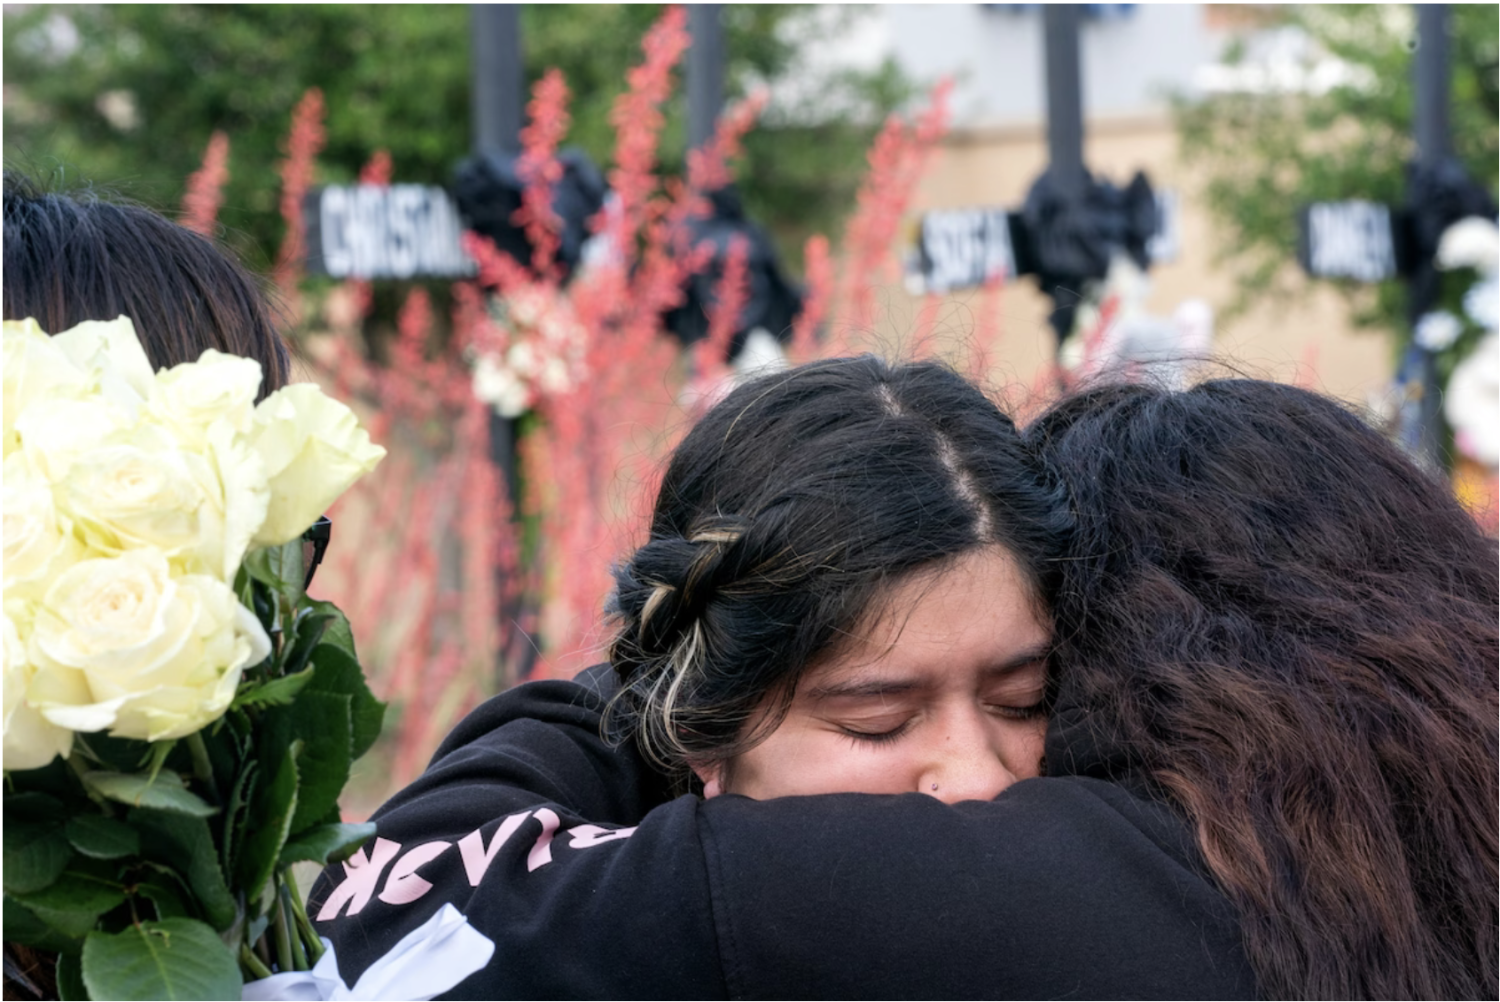 Marisella Mendoza, whose friend Christian LaCour was killed in the Allen, Texas shooting on Saturday, is comforted at a makeshift memorial outside the Allen Premium Outlets on Monday. (Jeffrey McWhorter for The Washington Post)